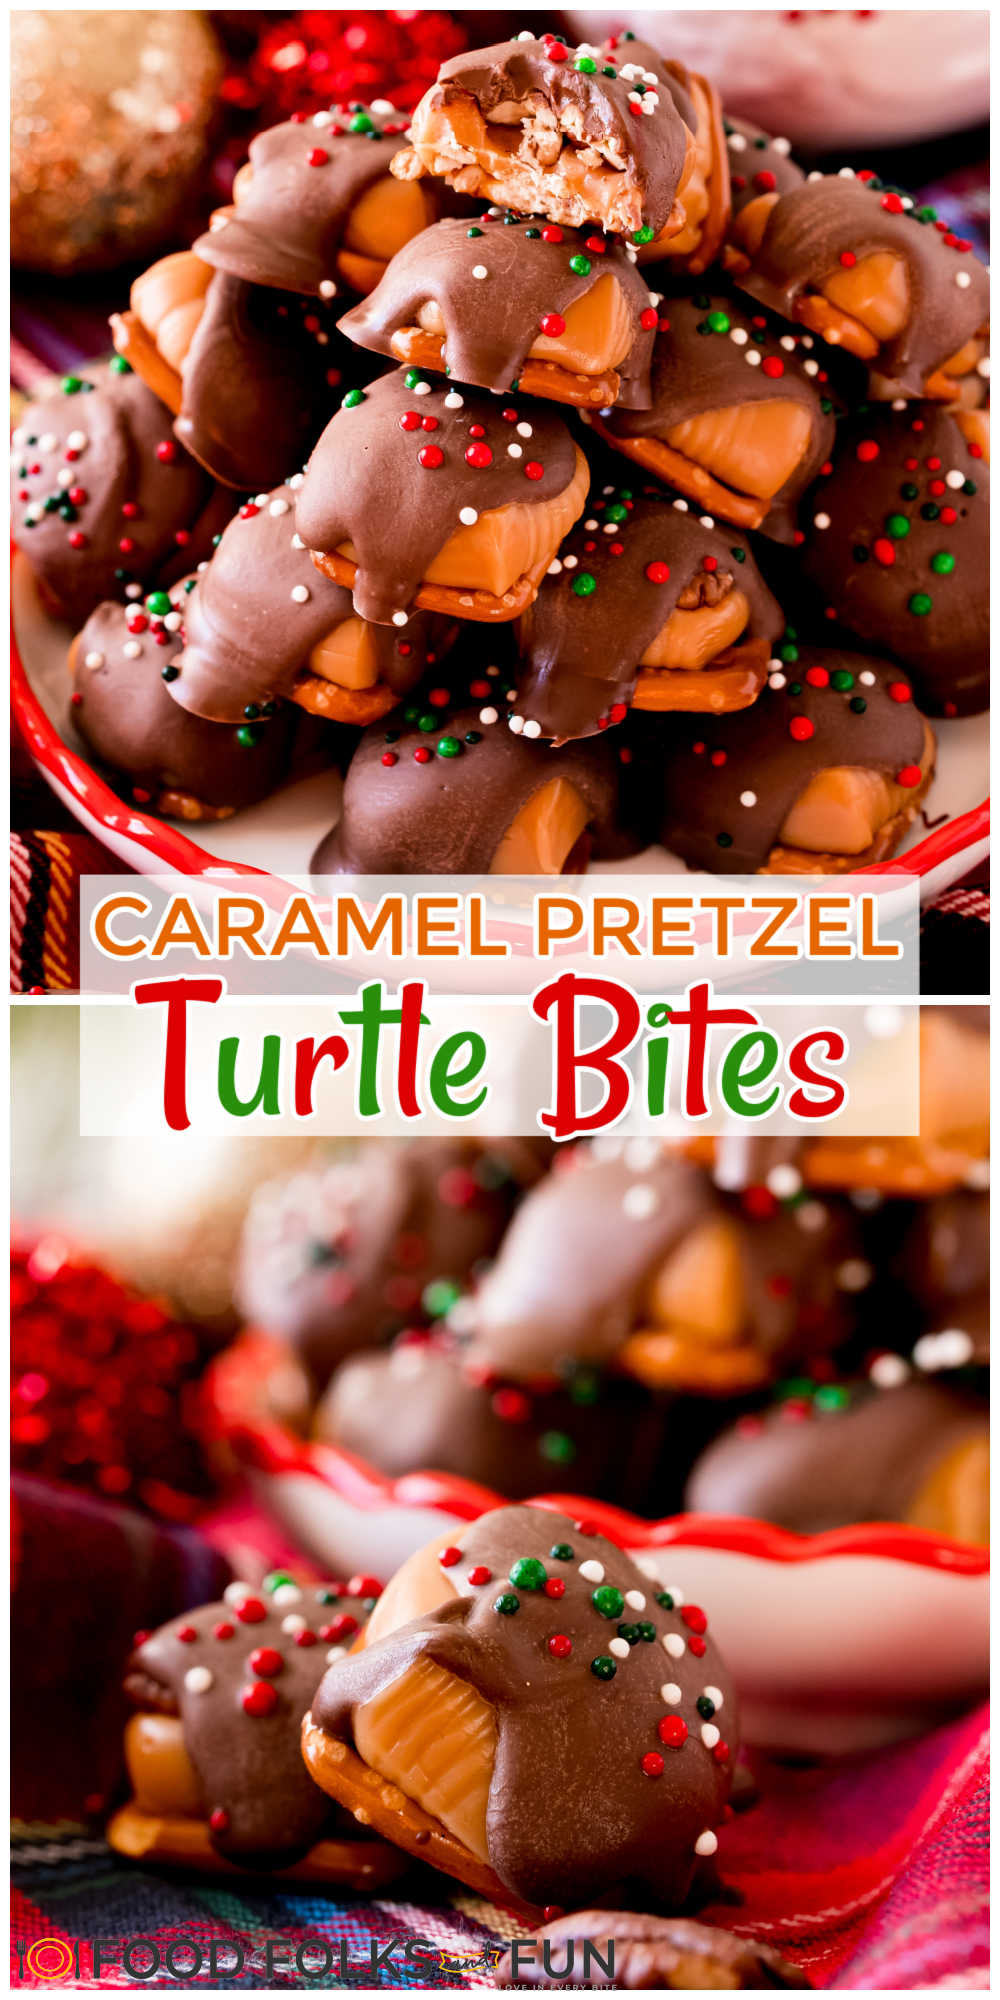 A fun twist on turtle candies, these easy Caramel Pretzel Turtles are made with pretzels, chewy caramels, pecans, and chocolate! Top them with sprinkles to make them extra festive! via @foodfolksandfun